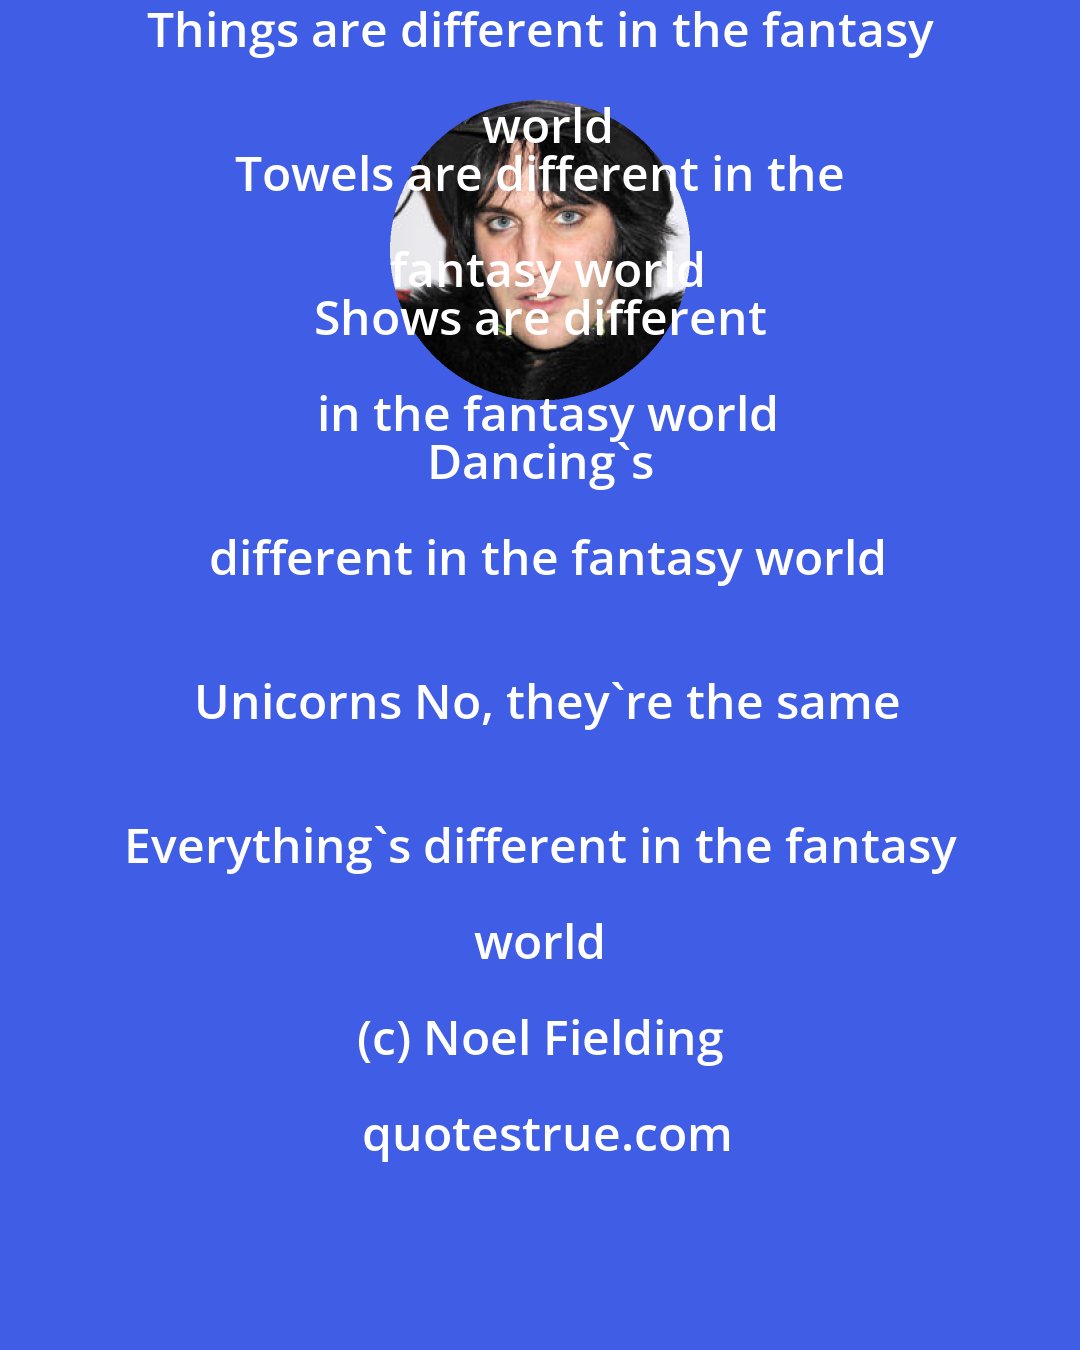 Noel Fielding: Things are different in the fantasy world
 Towels are different in the fantasy world
 Shows are different in the fantasy world
 Dancing's different in the fantasy world
 Unicorns No, they're the same
 Everything's different in the fantasy world